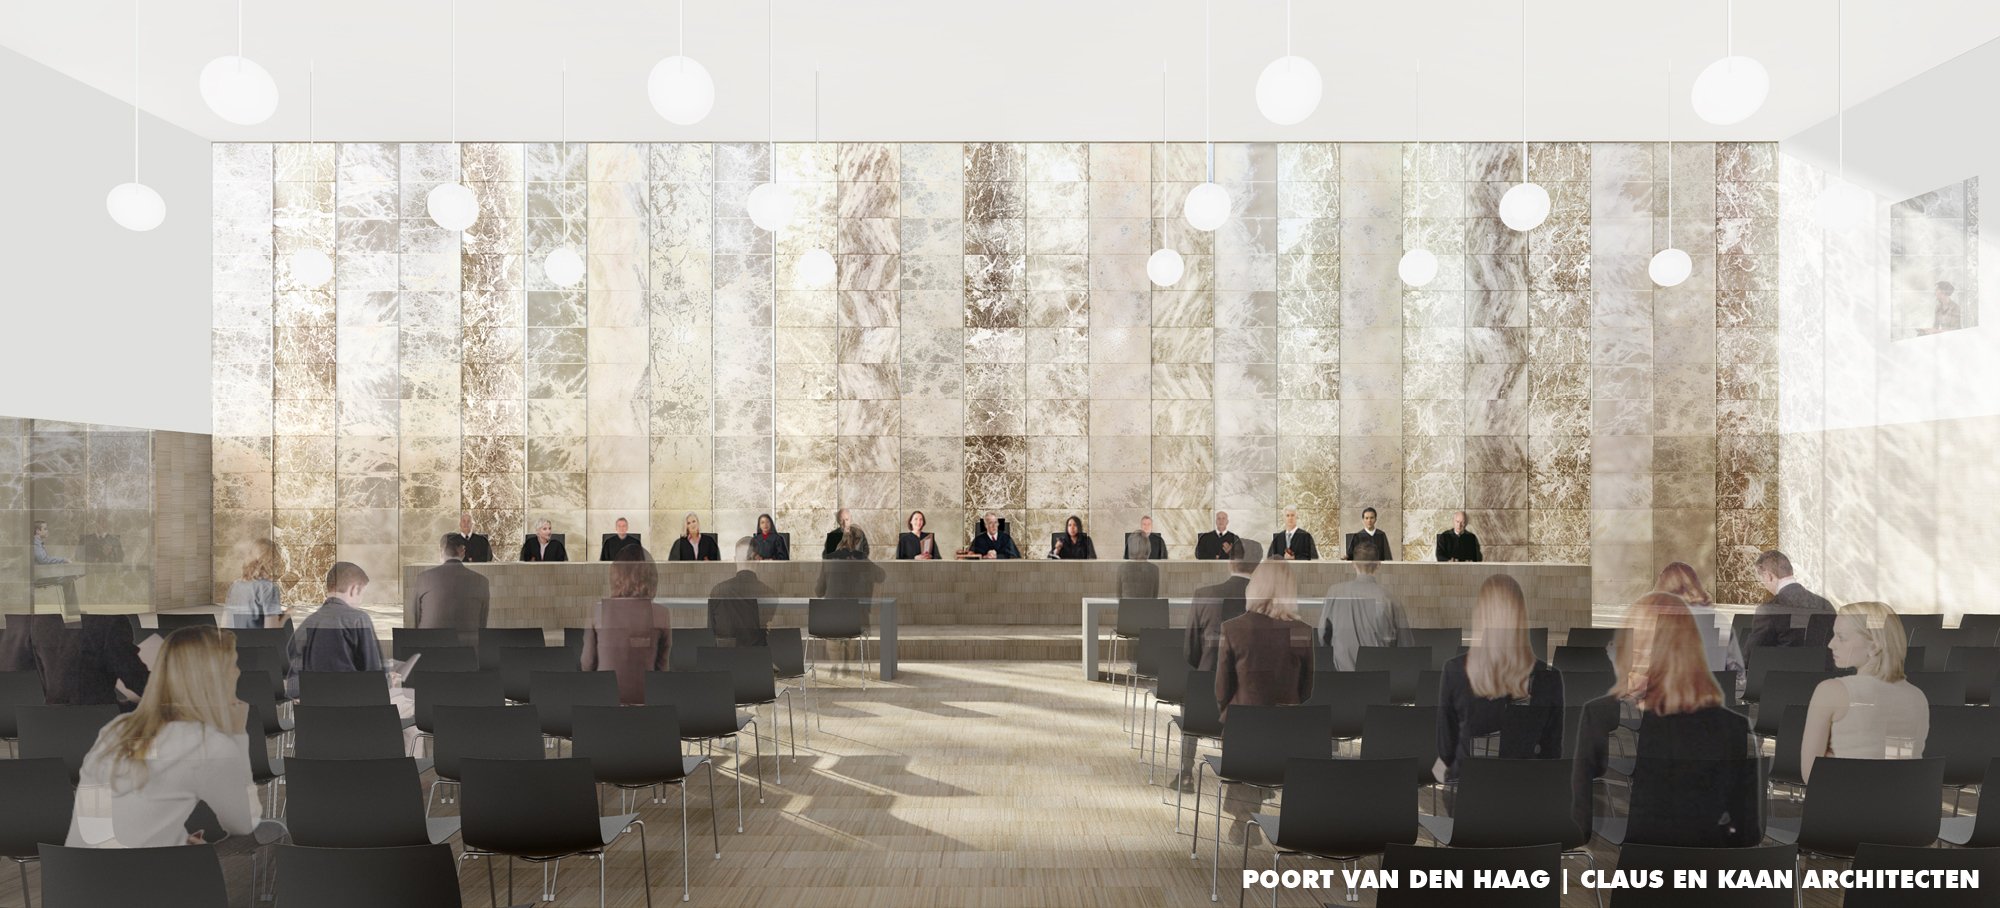 Architect's visualisation of courtroom interior